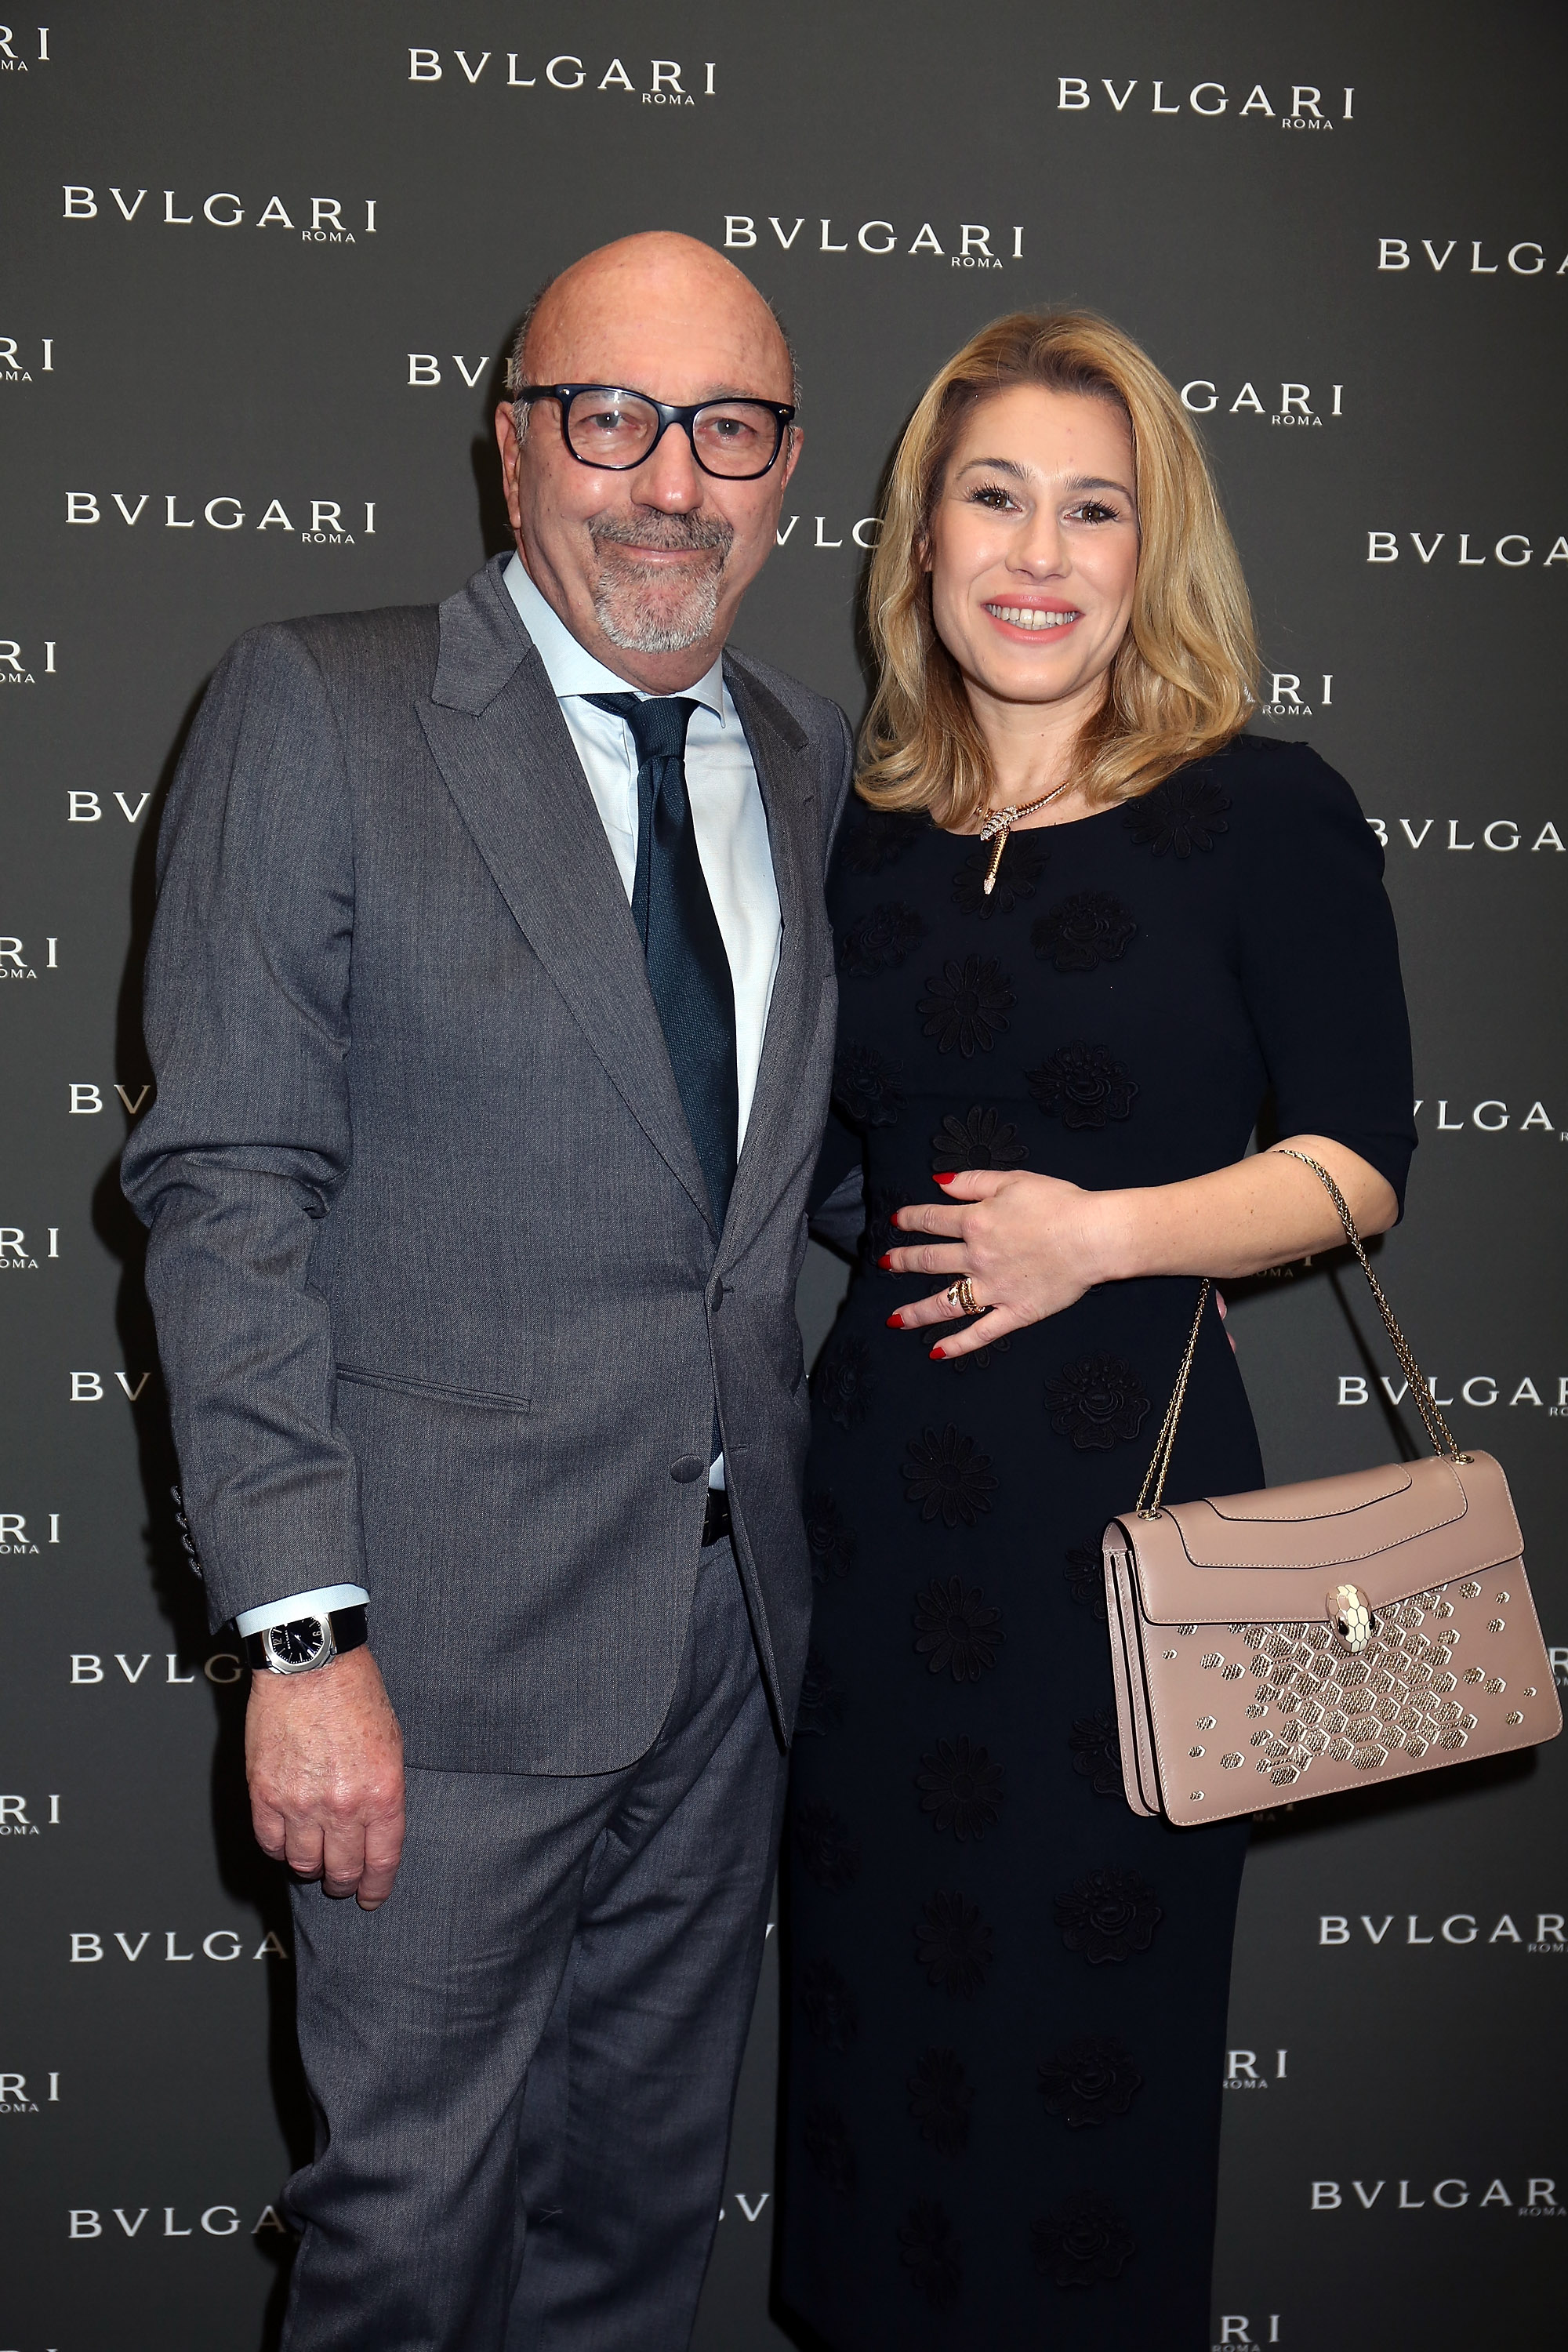 Bulgari Takes the Golden Globes to Rome - Daily Front Row